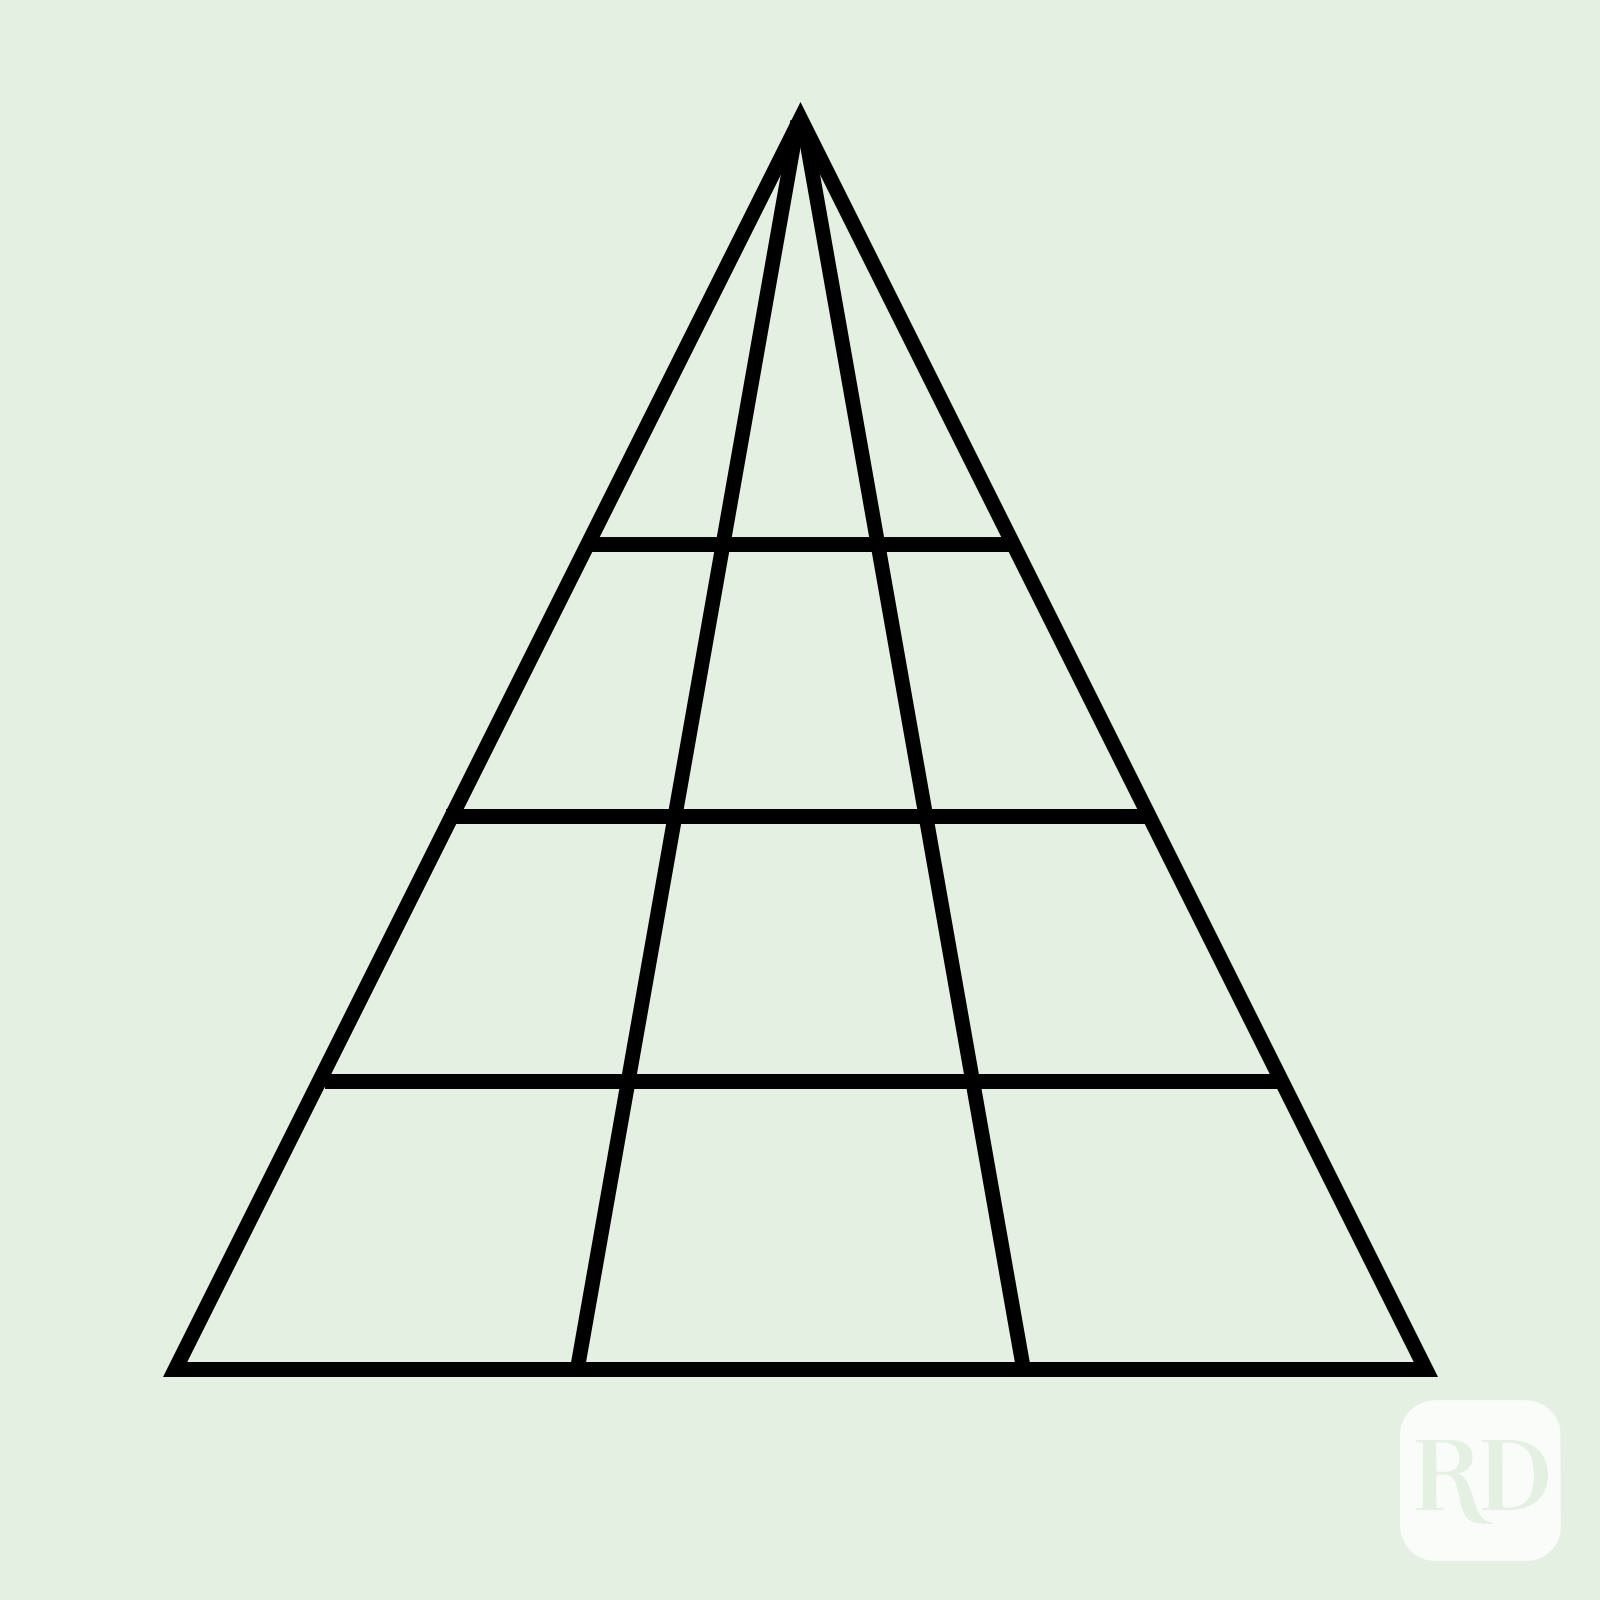 How Many Triangles Do You See? Learn the Answer | Reader's ...